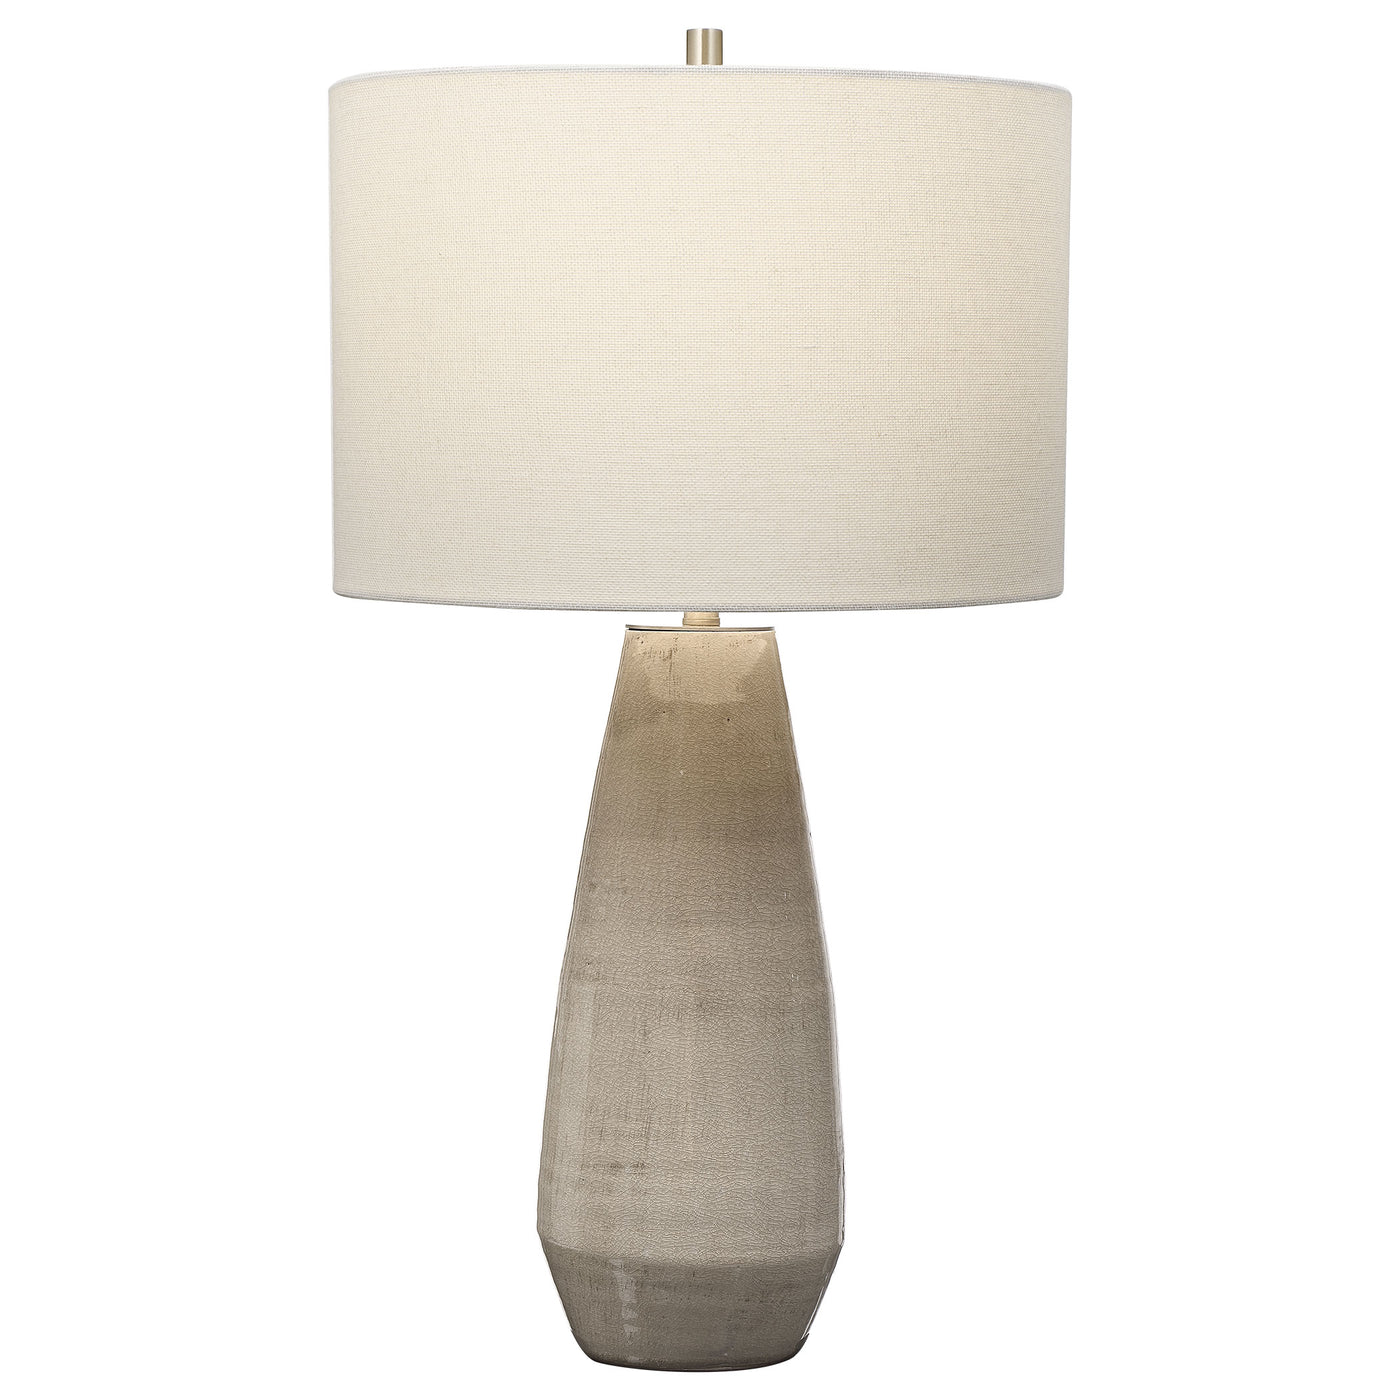 Simple Yet Stylish, This Ceramic Table Lamp Is Finished In A Crackled Taupe-gray Glaze With Noticeable Distressed Details ...